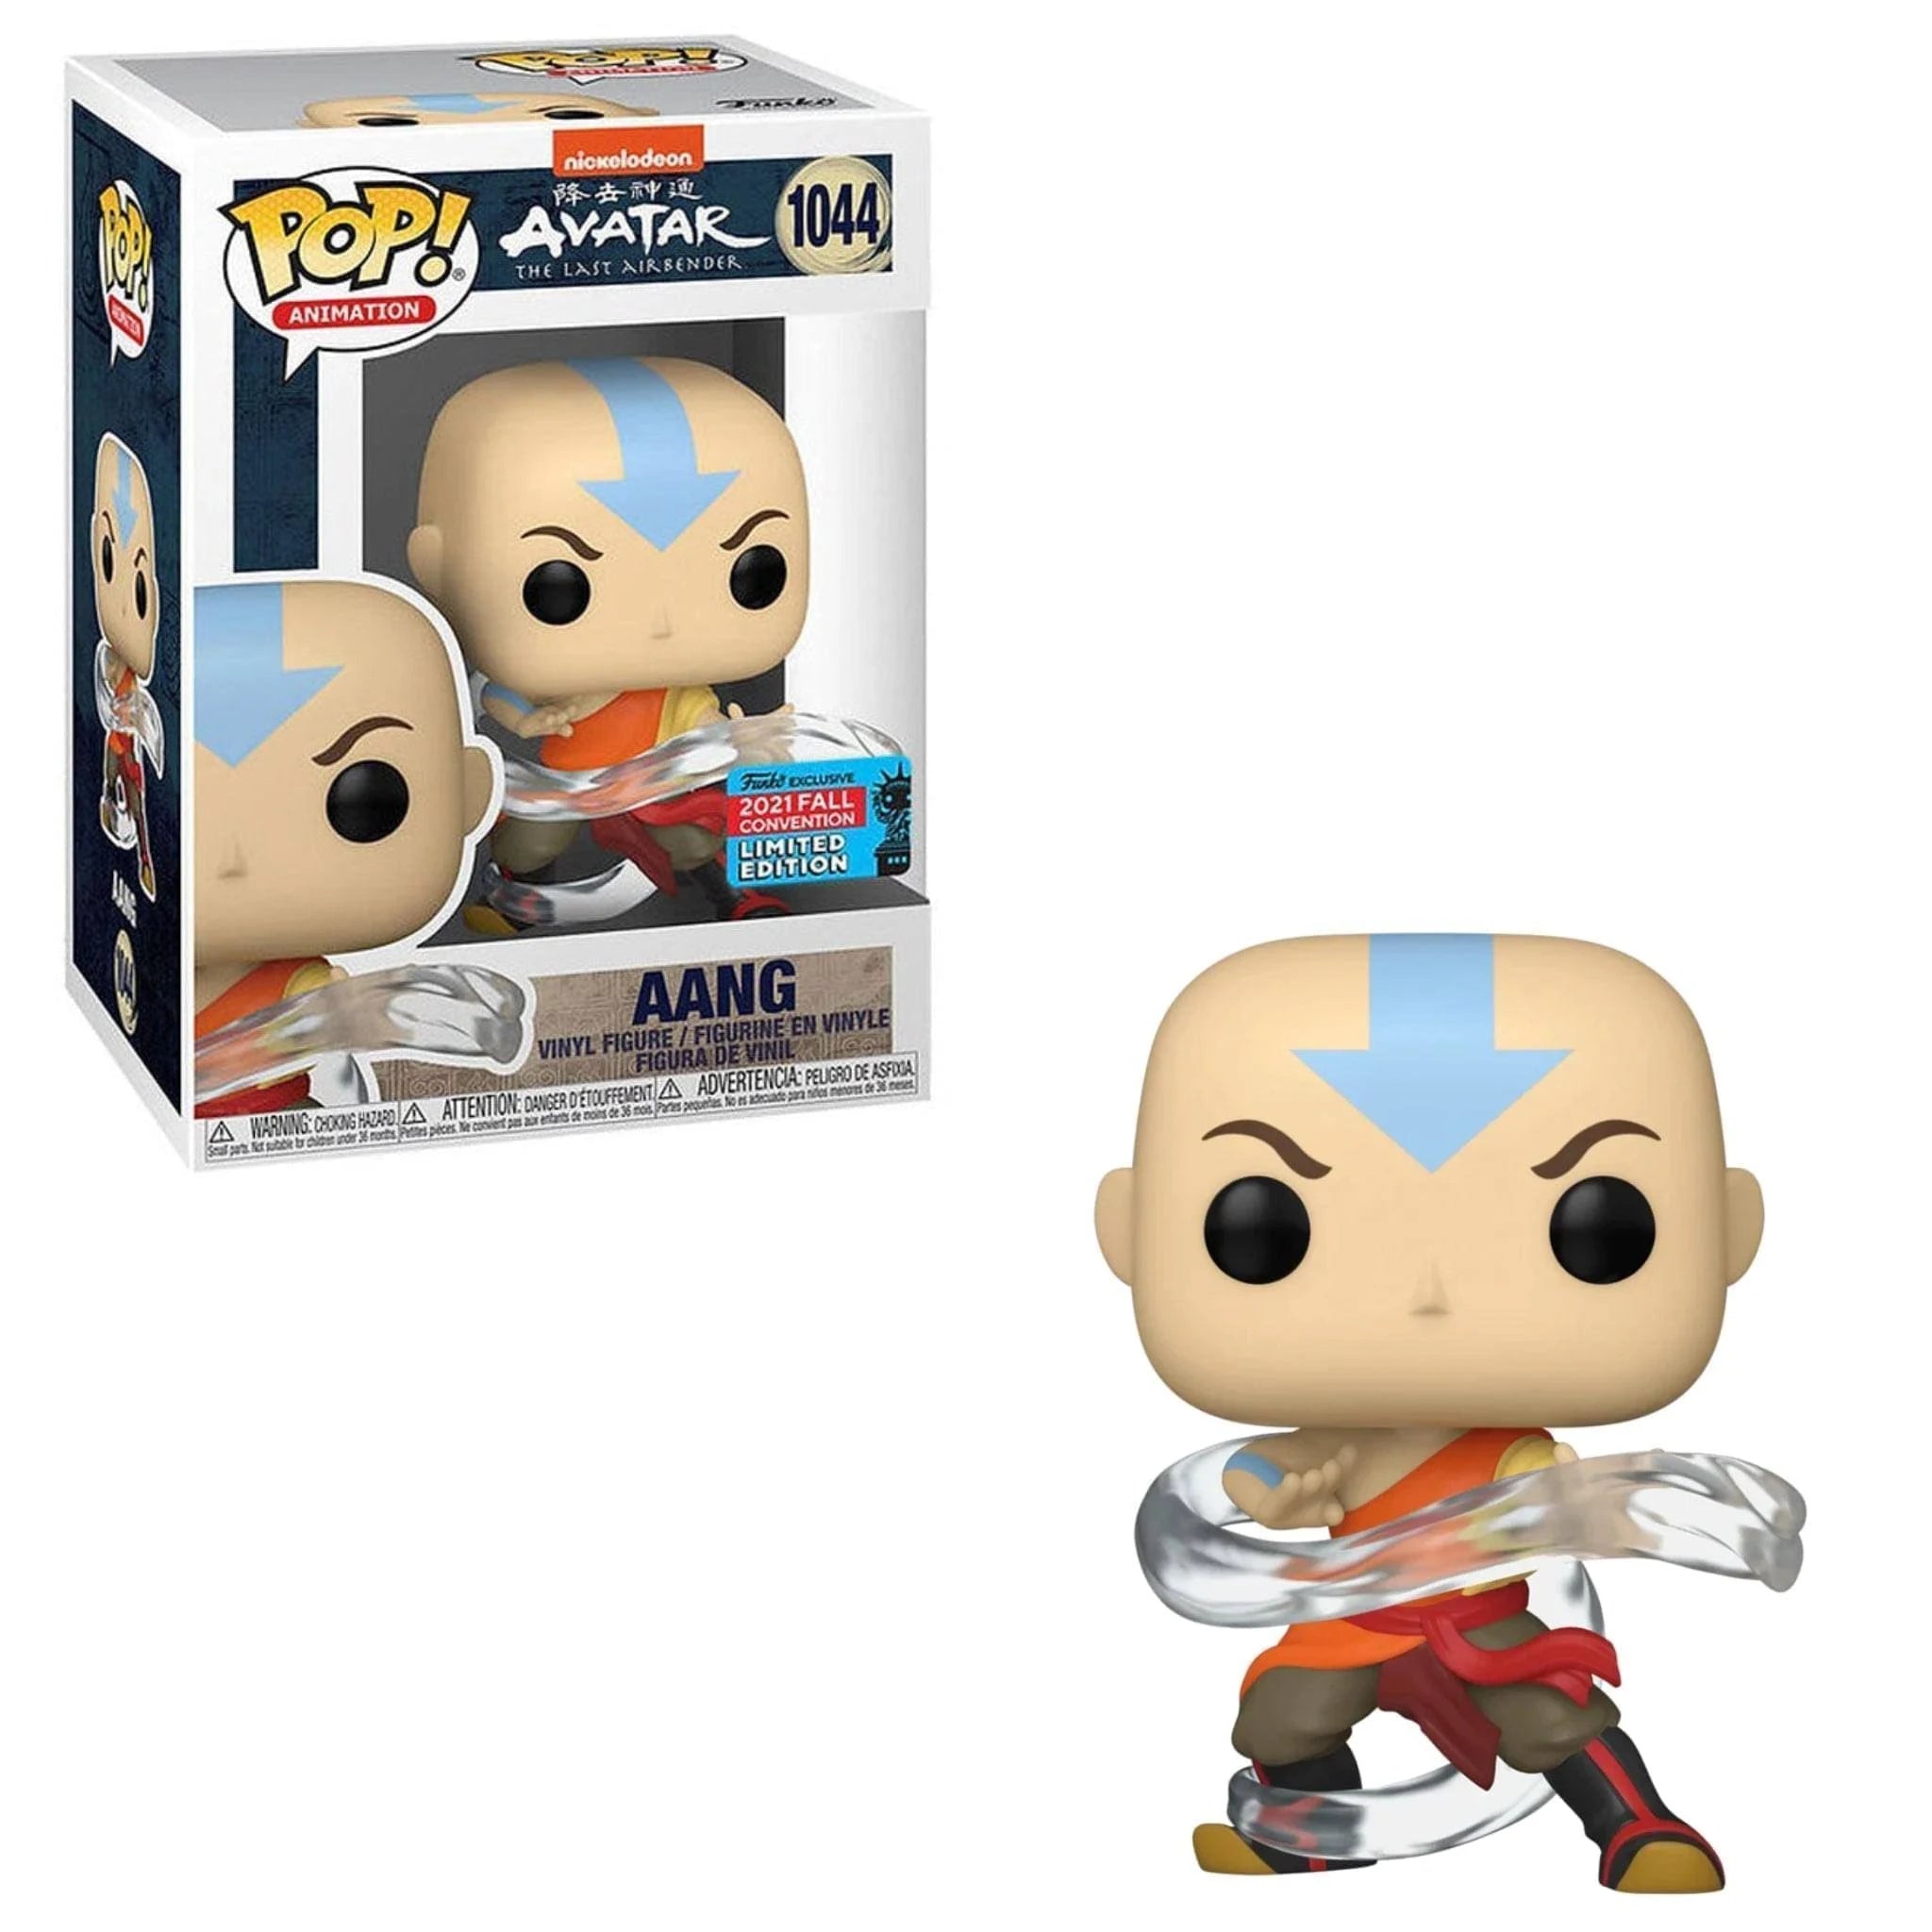 Funko Pop! Animation Avatar The Last Airbender Aang Fall Convention Exclusive